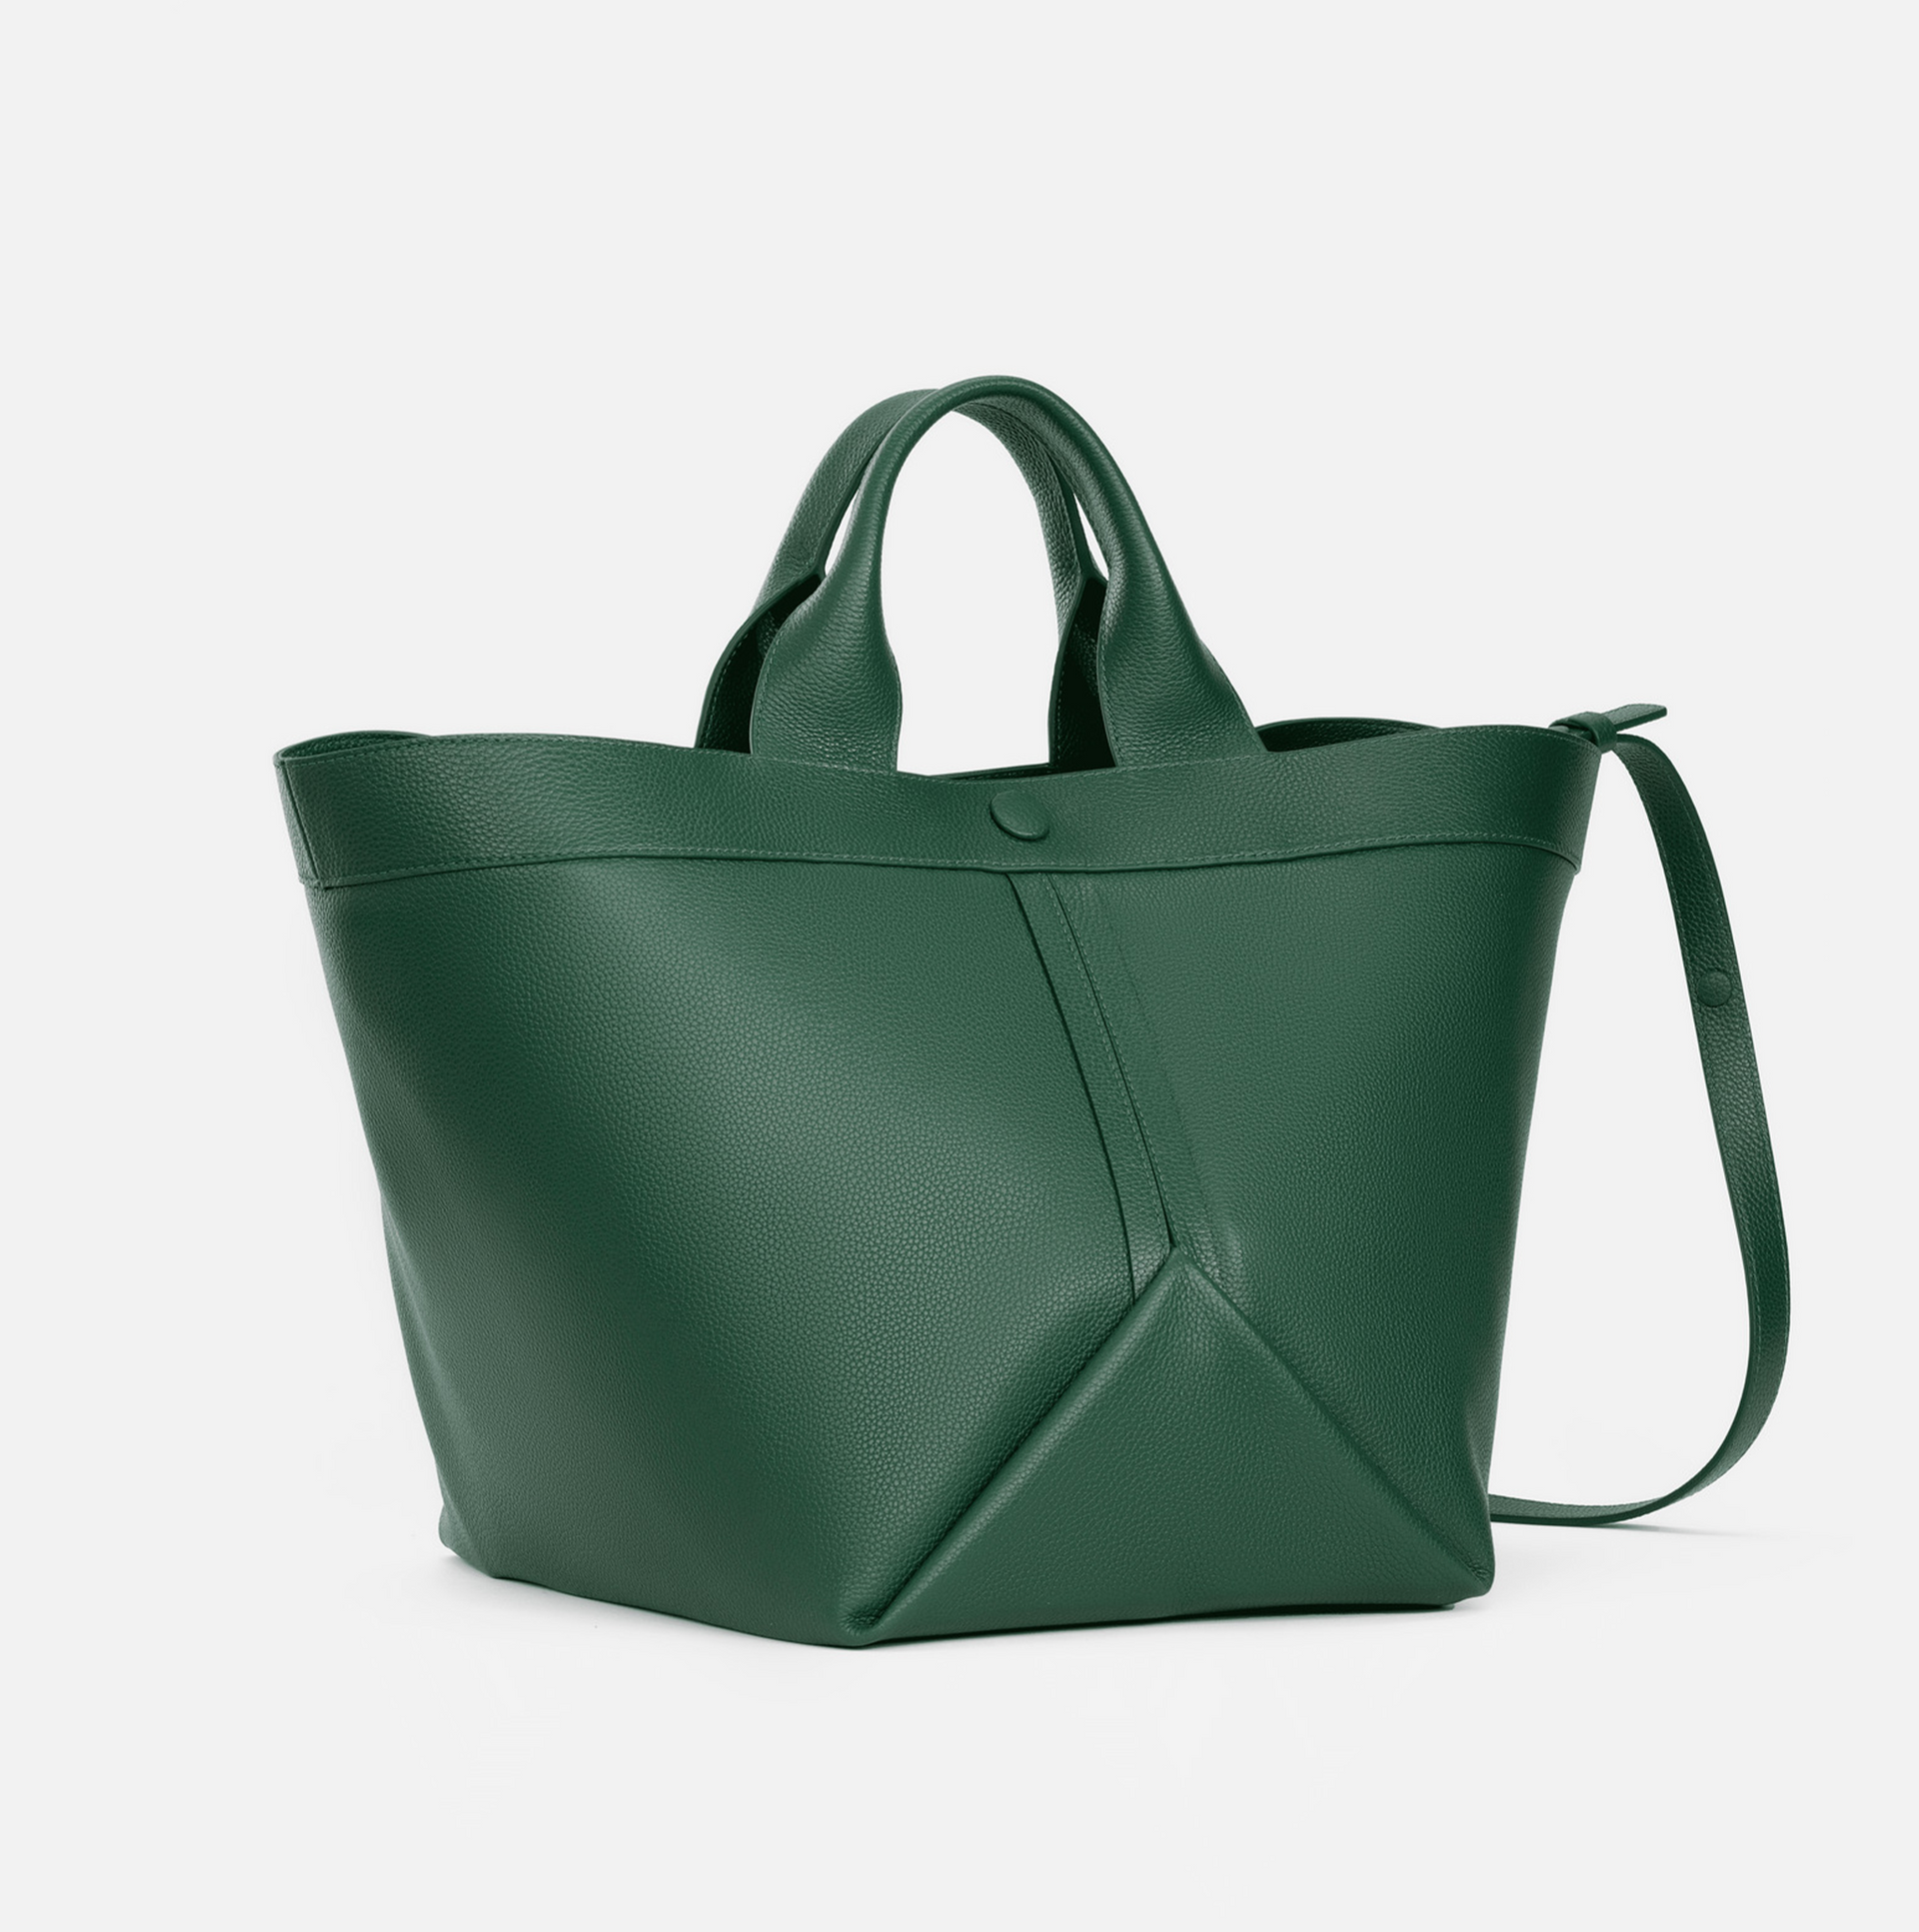 Gusset large pebble leather tote in fern